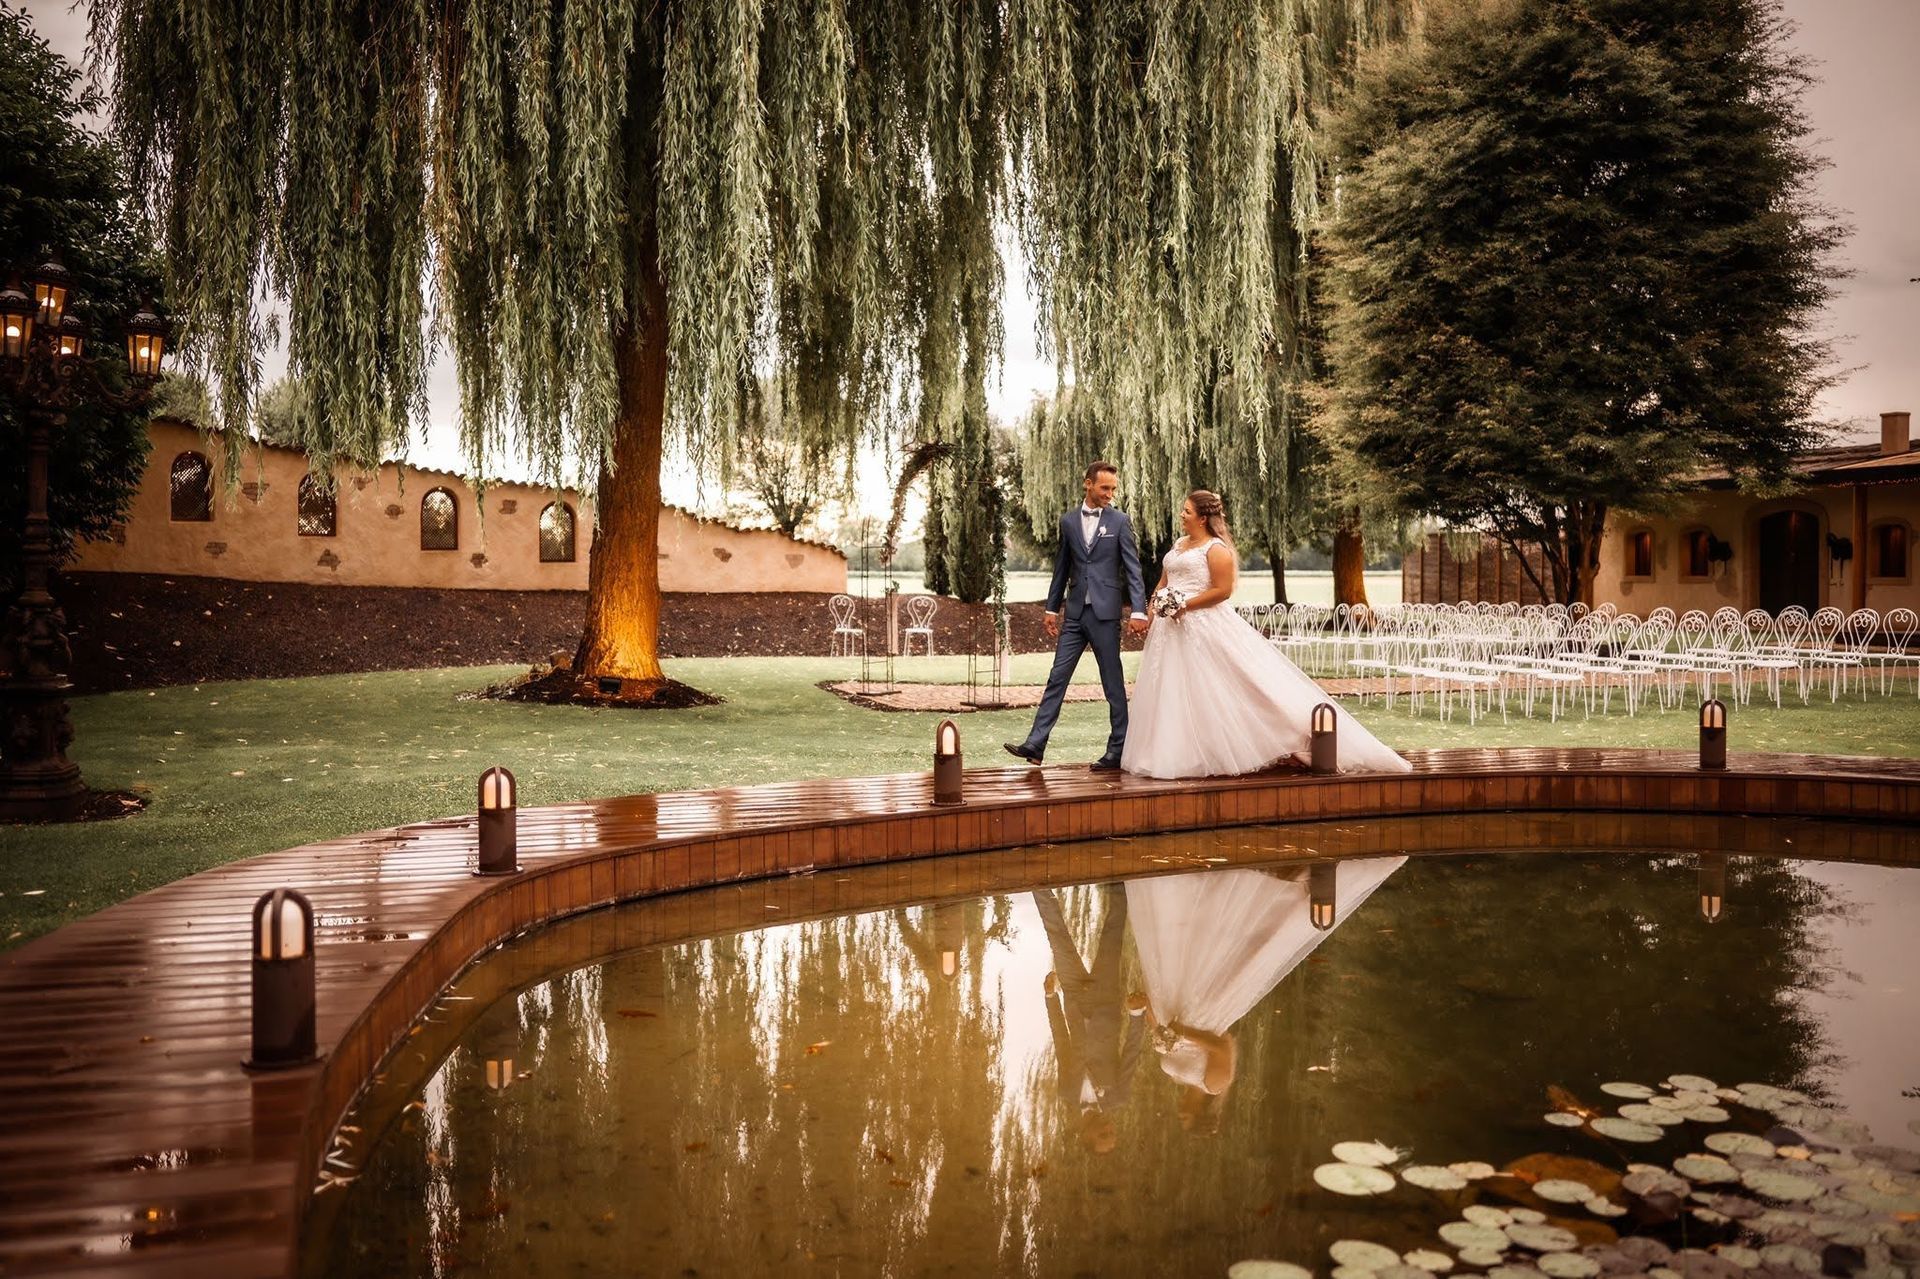 A bride and groom are standing next to a pond.